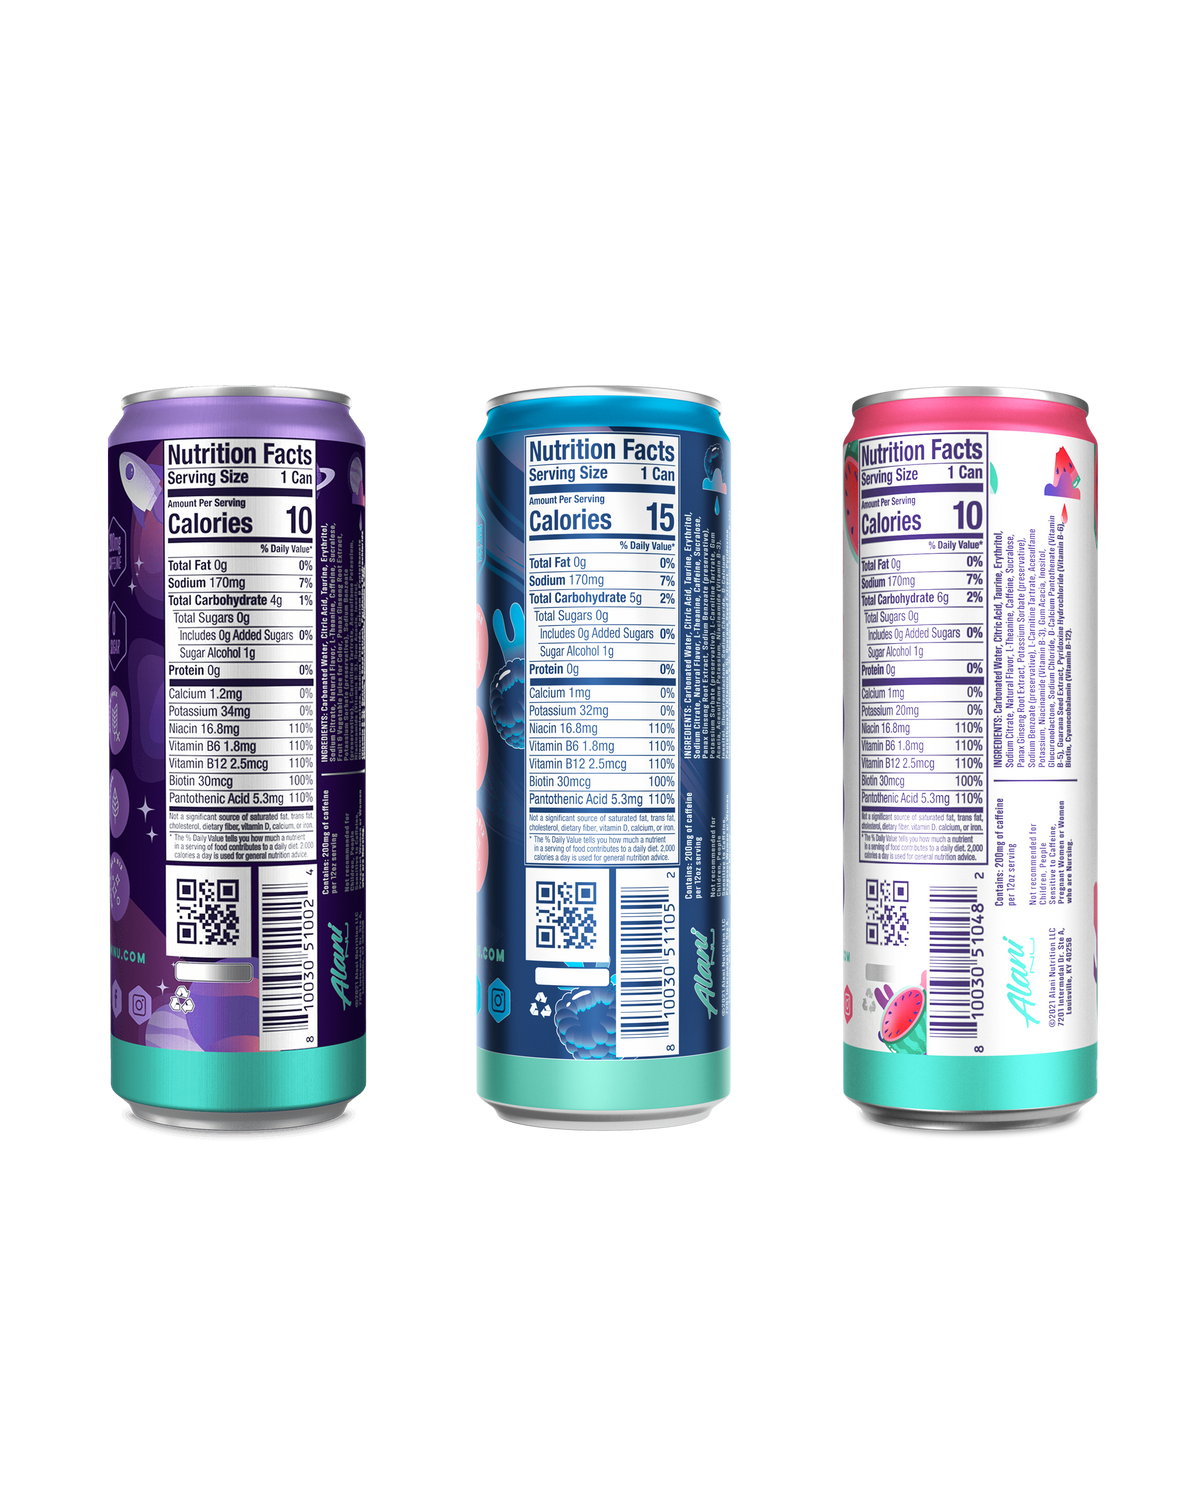 A back view of energy drinks in Fruit Blast flavor highlighting nutrition facts details. 